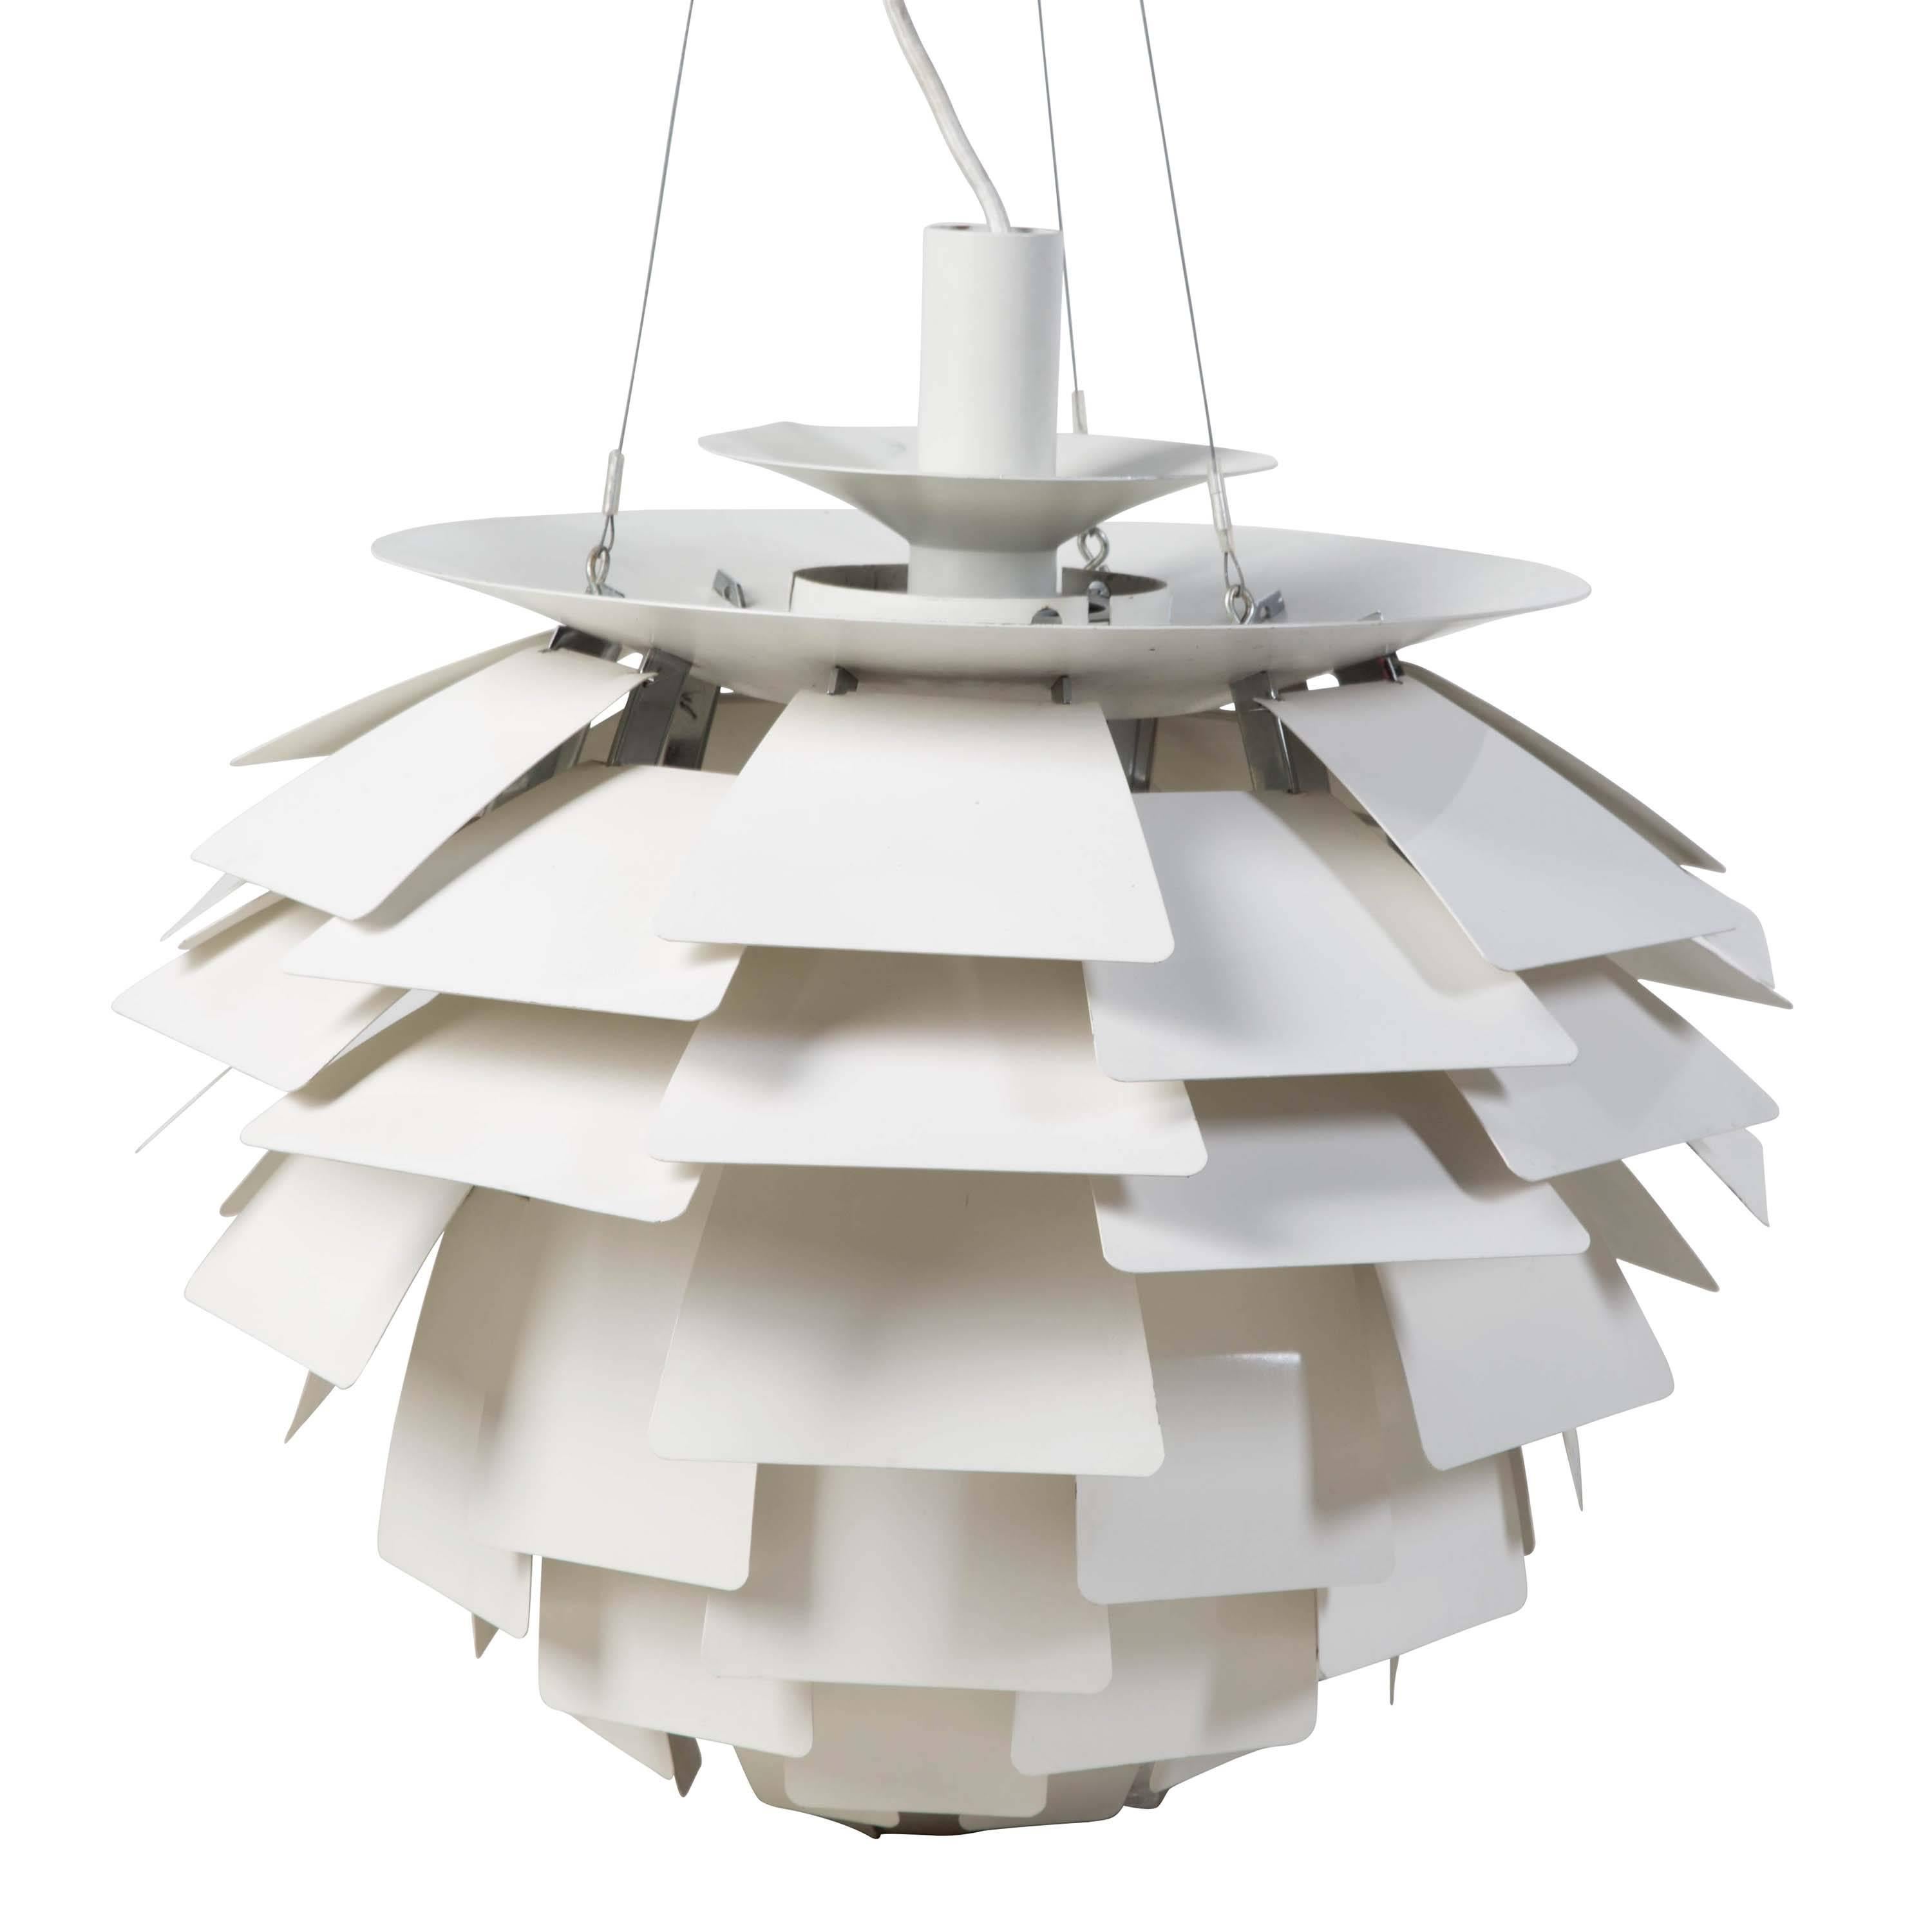 A design icon dating from 1958, the PH Artichoke pendant light has 72 leaves in 12 circular rows, allowing the light to be viewed from any angle with out being able to see the light source. Designed in Denmark by Poul Henningsen for Louis Poulsen.